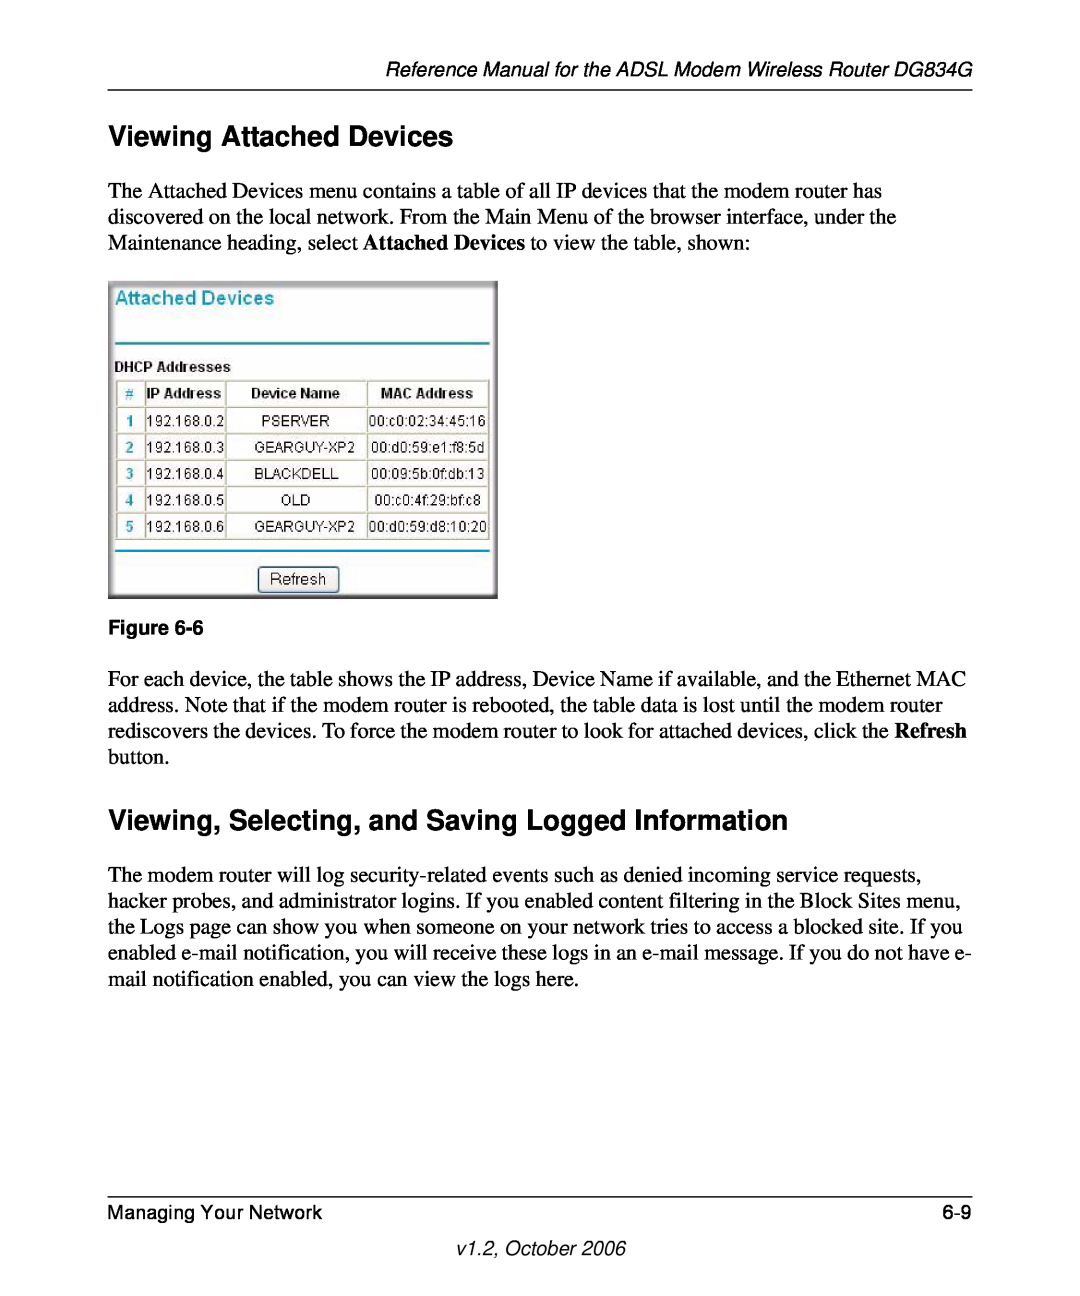 NETGEAR DG834G manual Viewing Attached Devices, Viewing, Selecting, and Saving Logged Information 